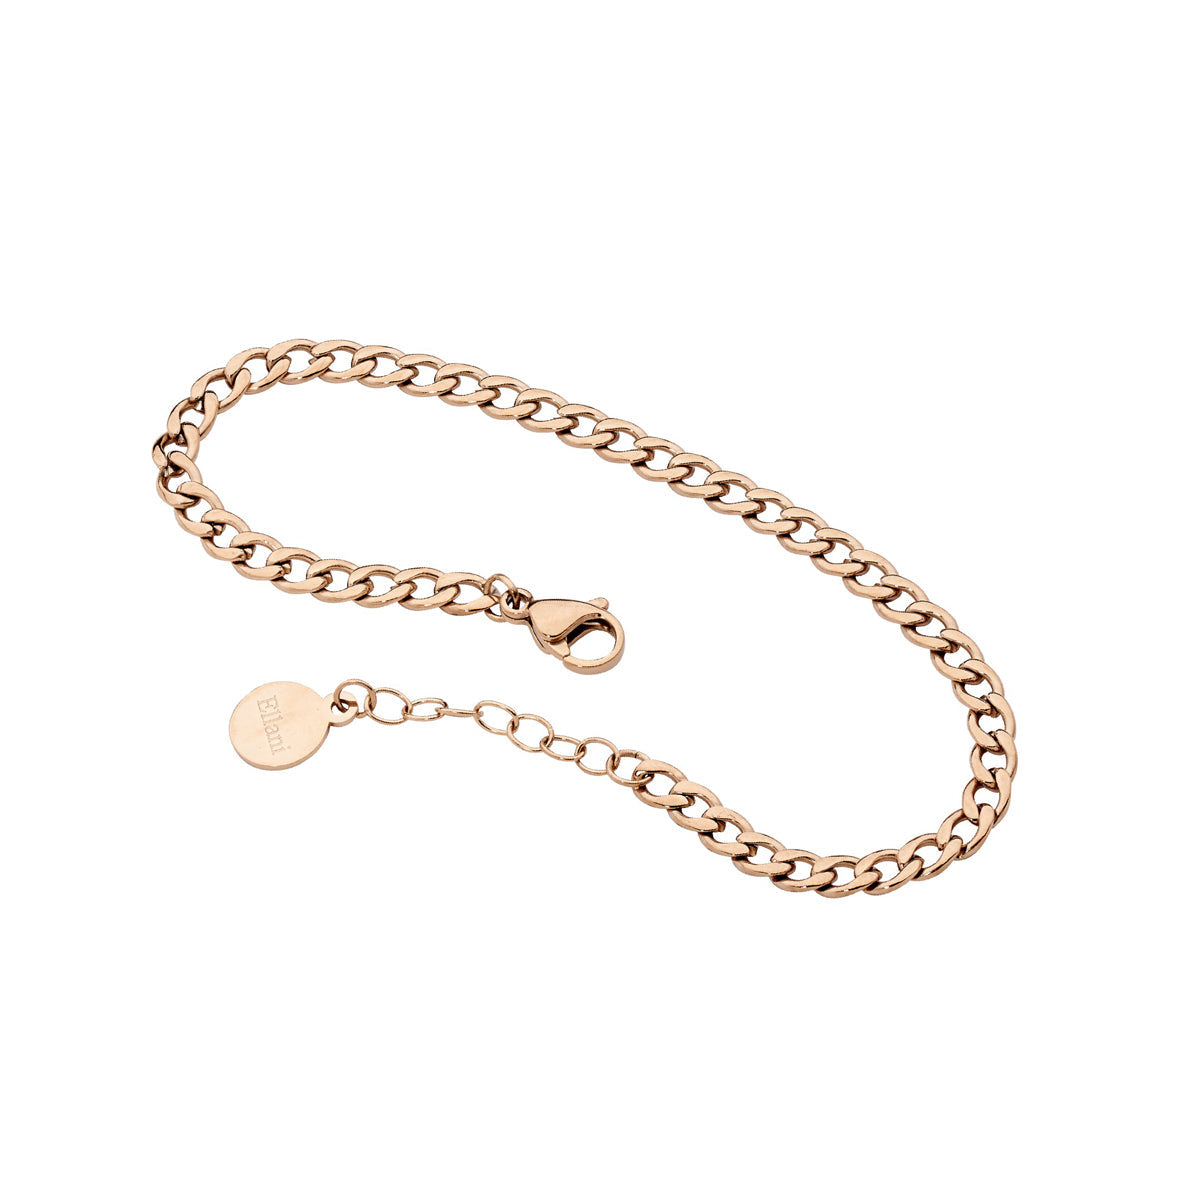 Stainless Steel Curb Chain Bracelet, 17cm+ Ext. With Rose Gold IP Plating 